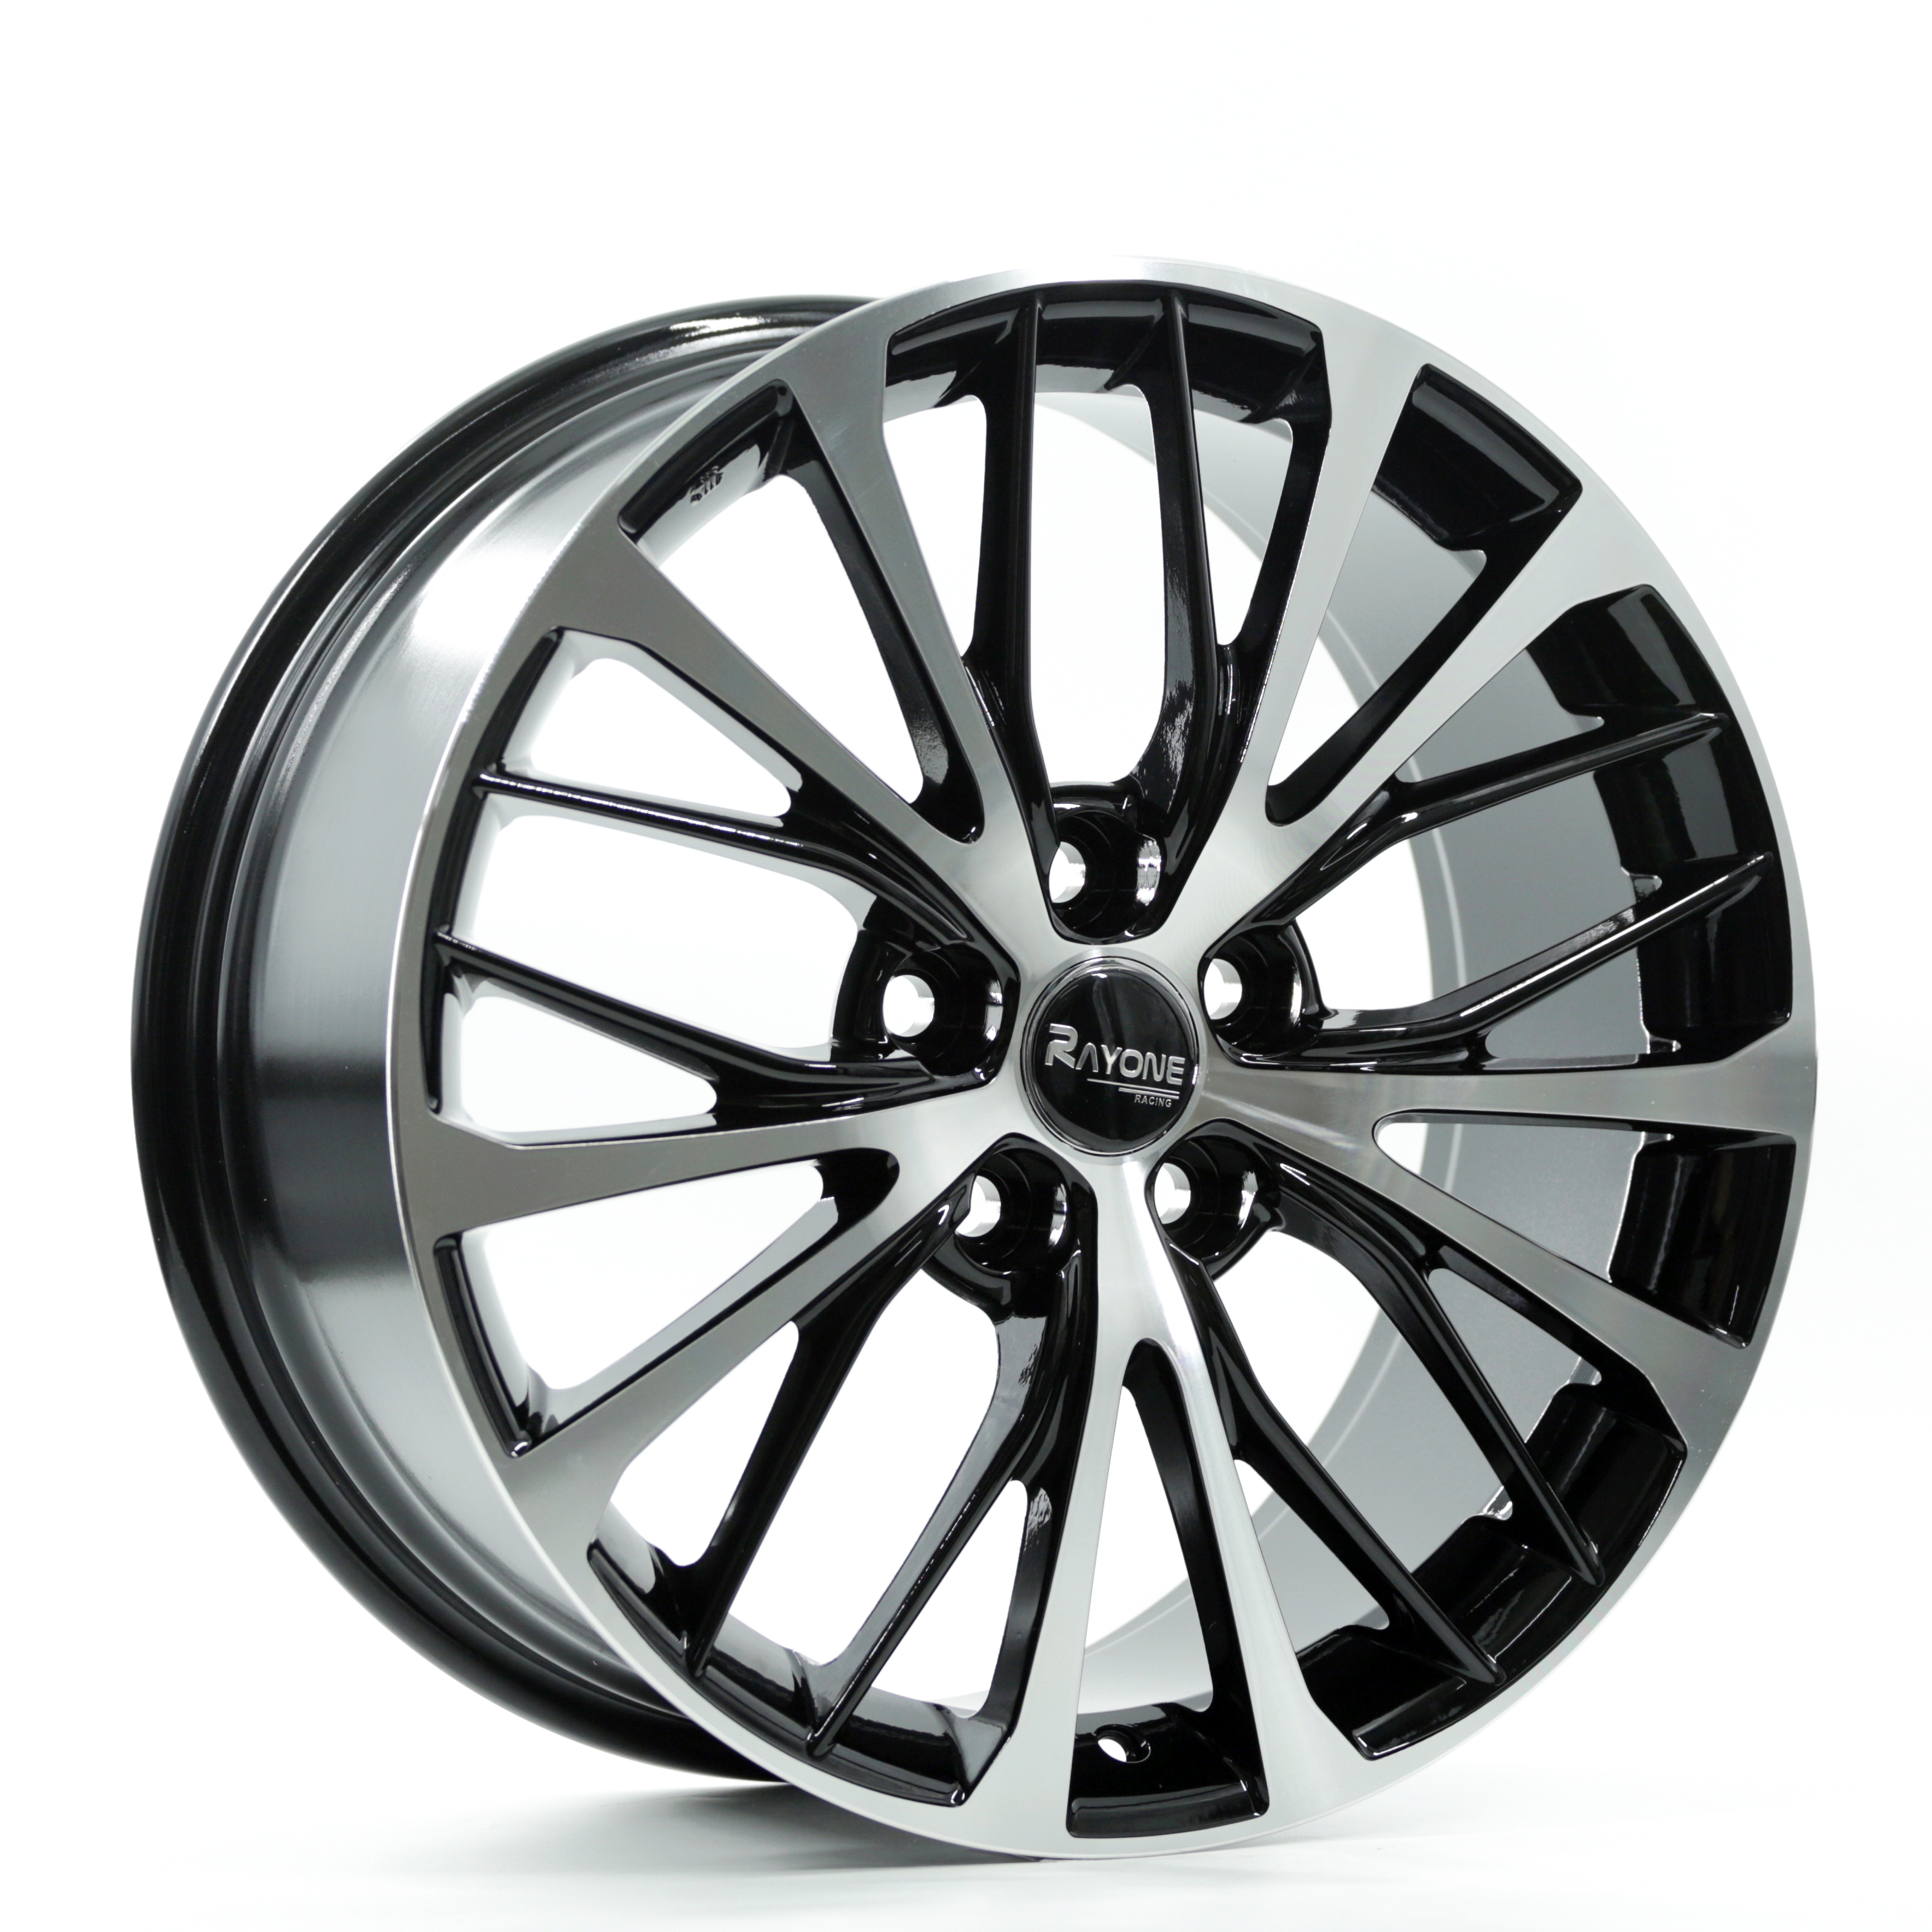 High-quality Casting Aluminum Alloy Wheels 18inch 5×114.3 For Camry